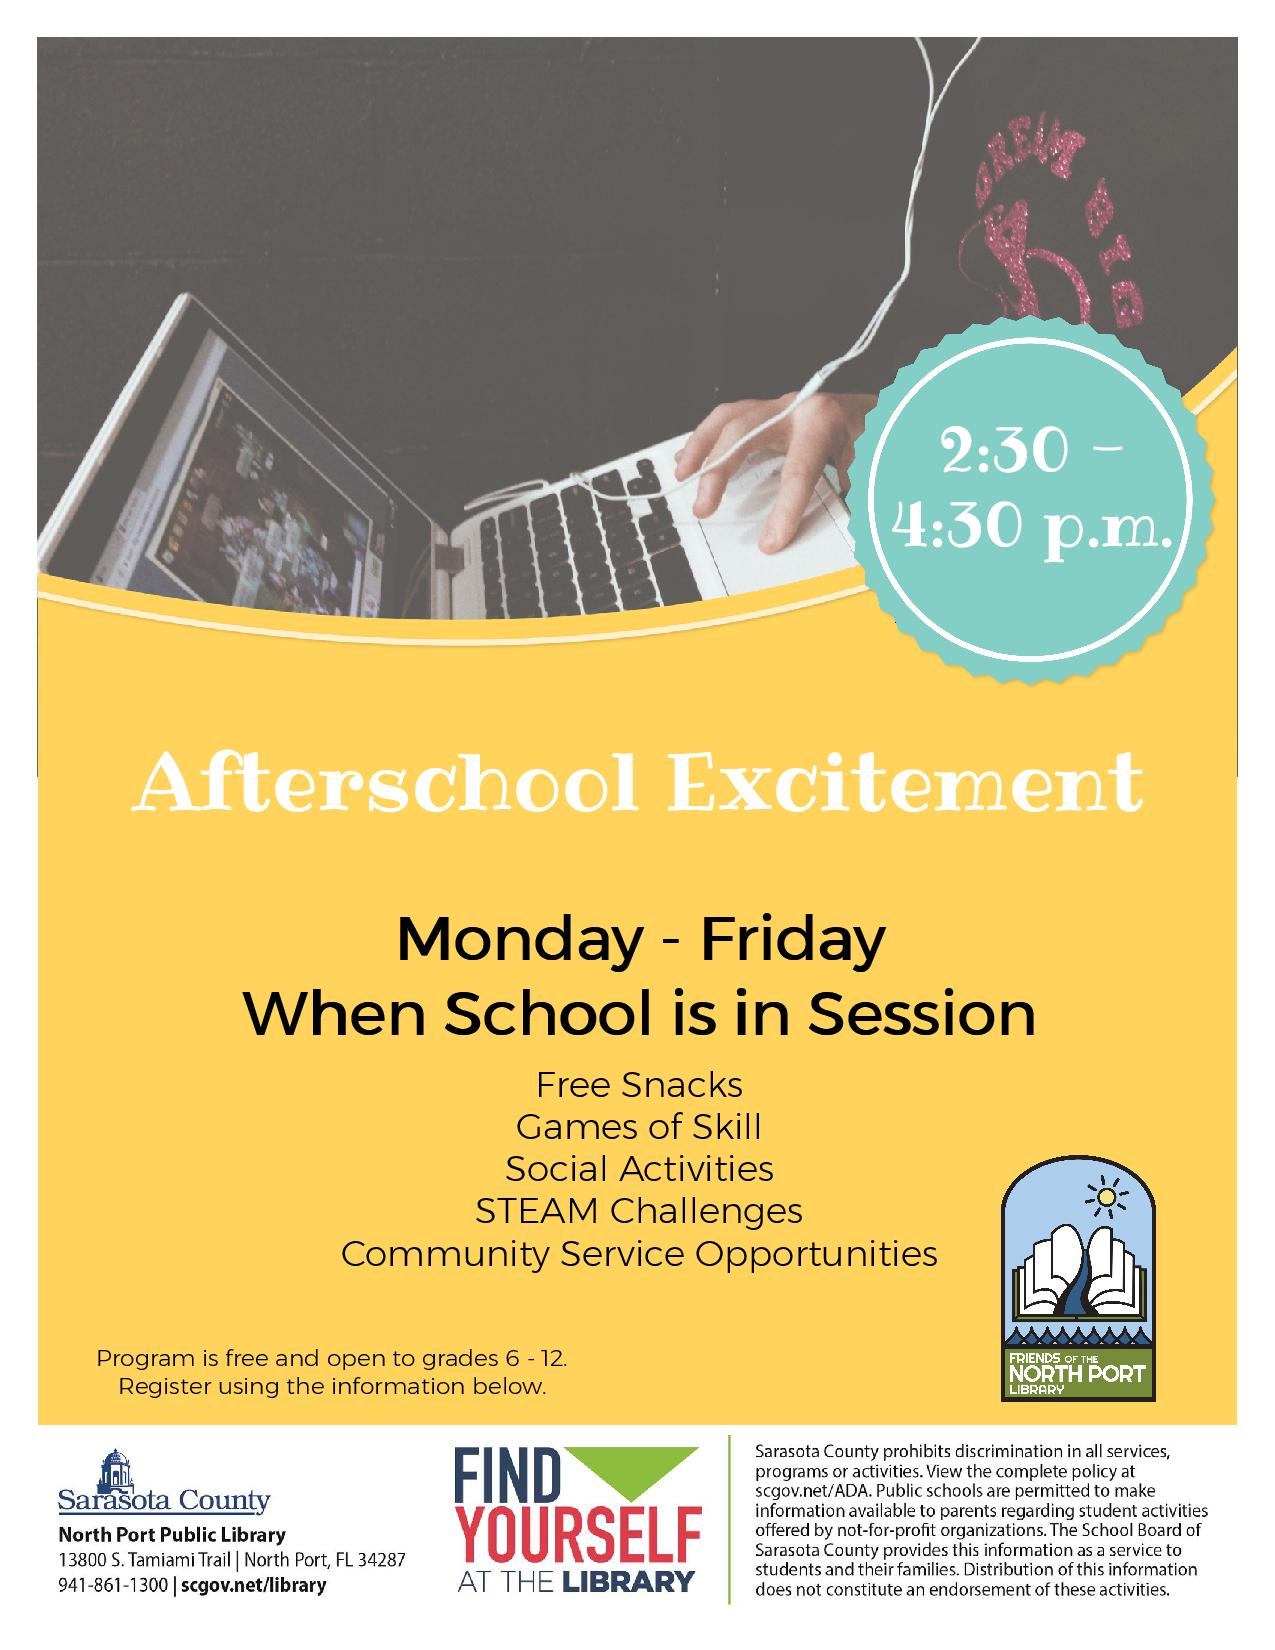 After school activities for children in grades six through twelve.  Parental permission required.  Monday through Friday, 2:30 to 4:30 p.m. when school is in session.